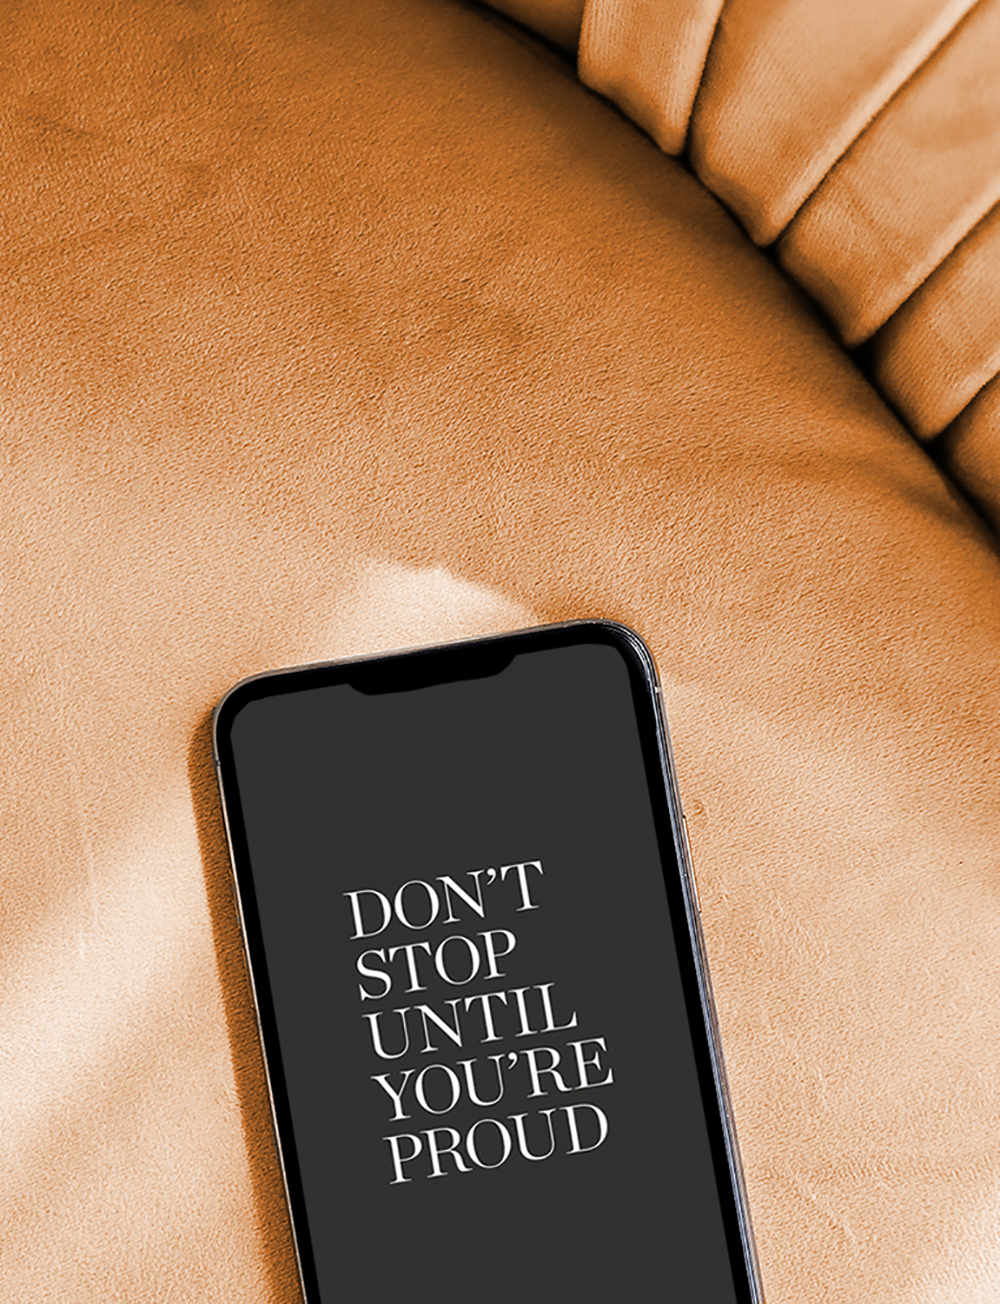 Sharing my mobile wallpapers to motivate & inspire you. Download them for free at KaraLayne.com!